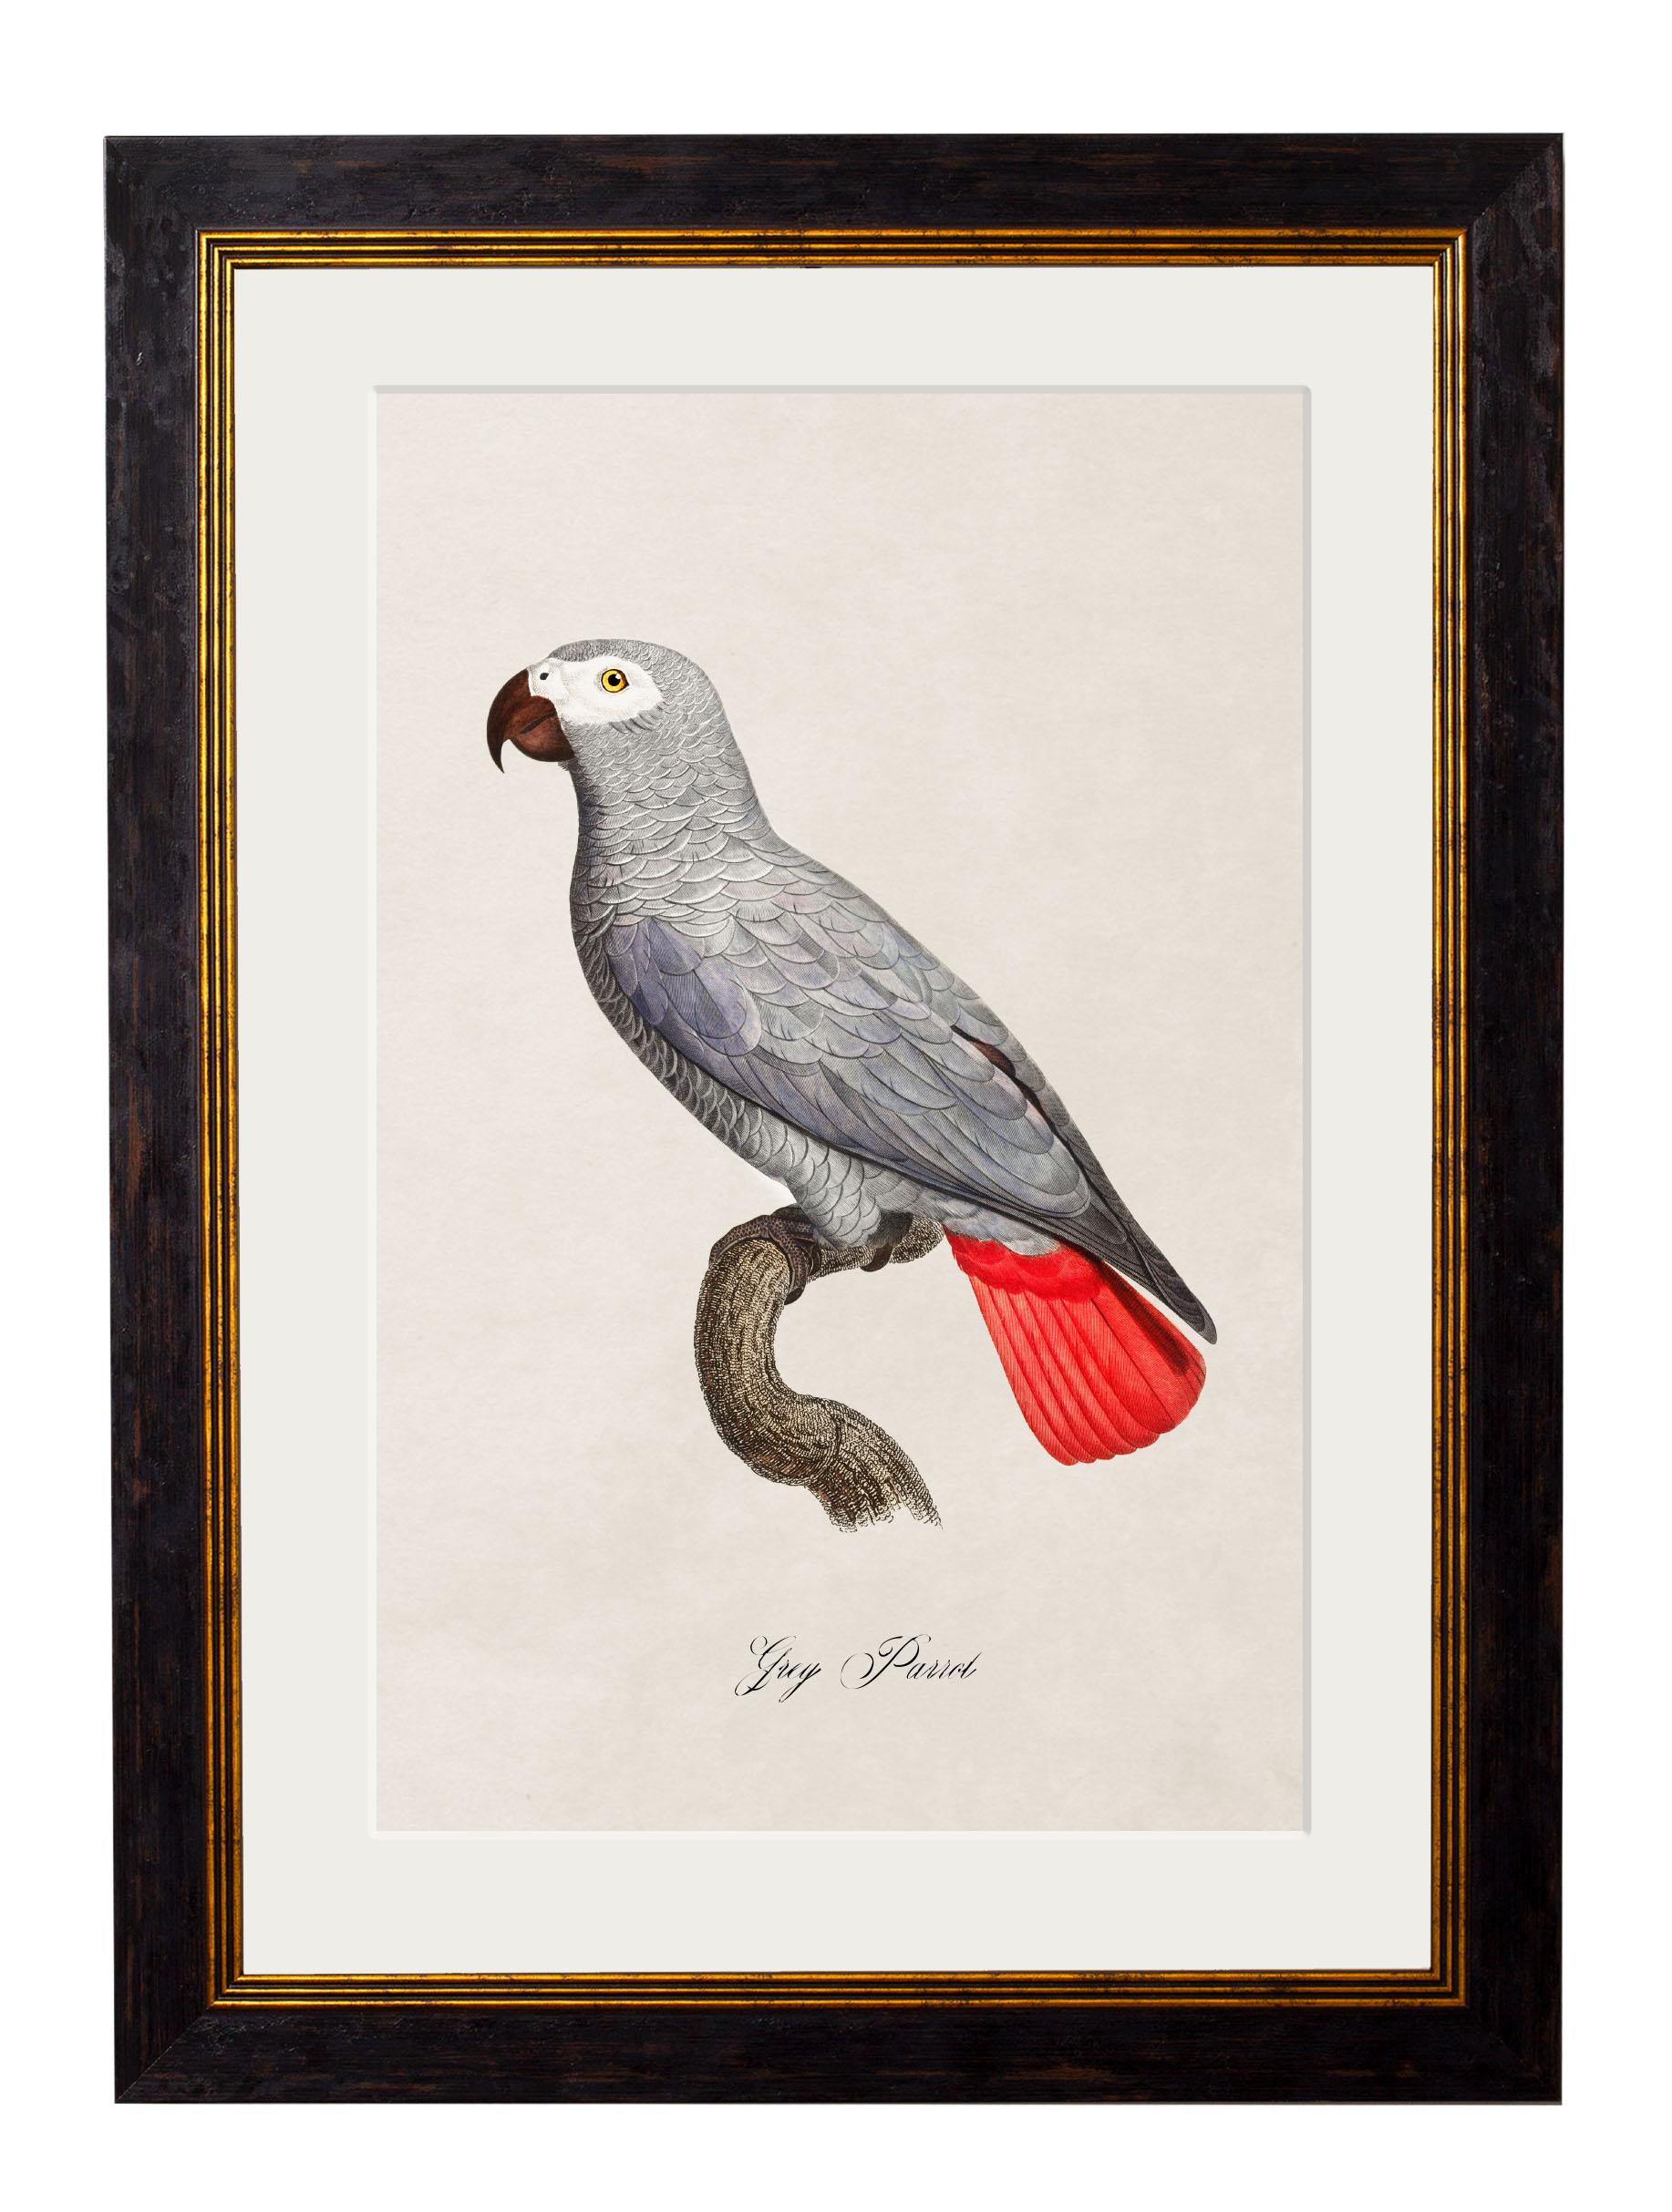 These are a set of FOUR digitally remastered prints of Parrots, hand coloured framed prints, originally from Circa 1800s.

Prints of this style were originally printed in black and white and then hand painted over the top to give them bright vibrant